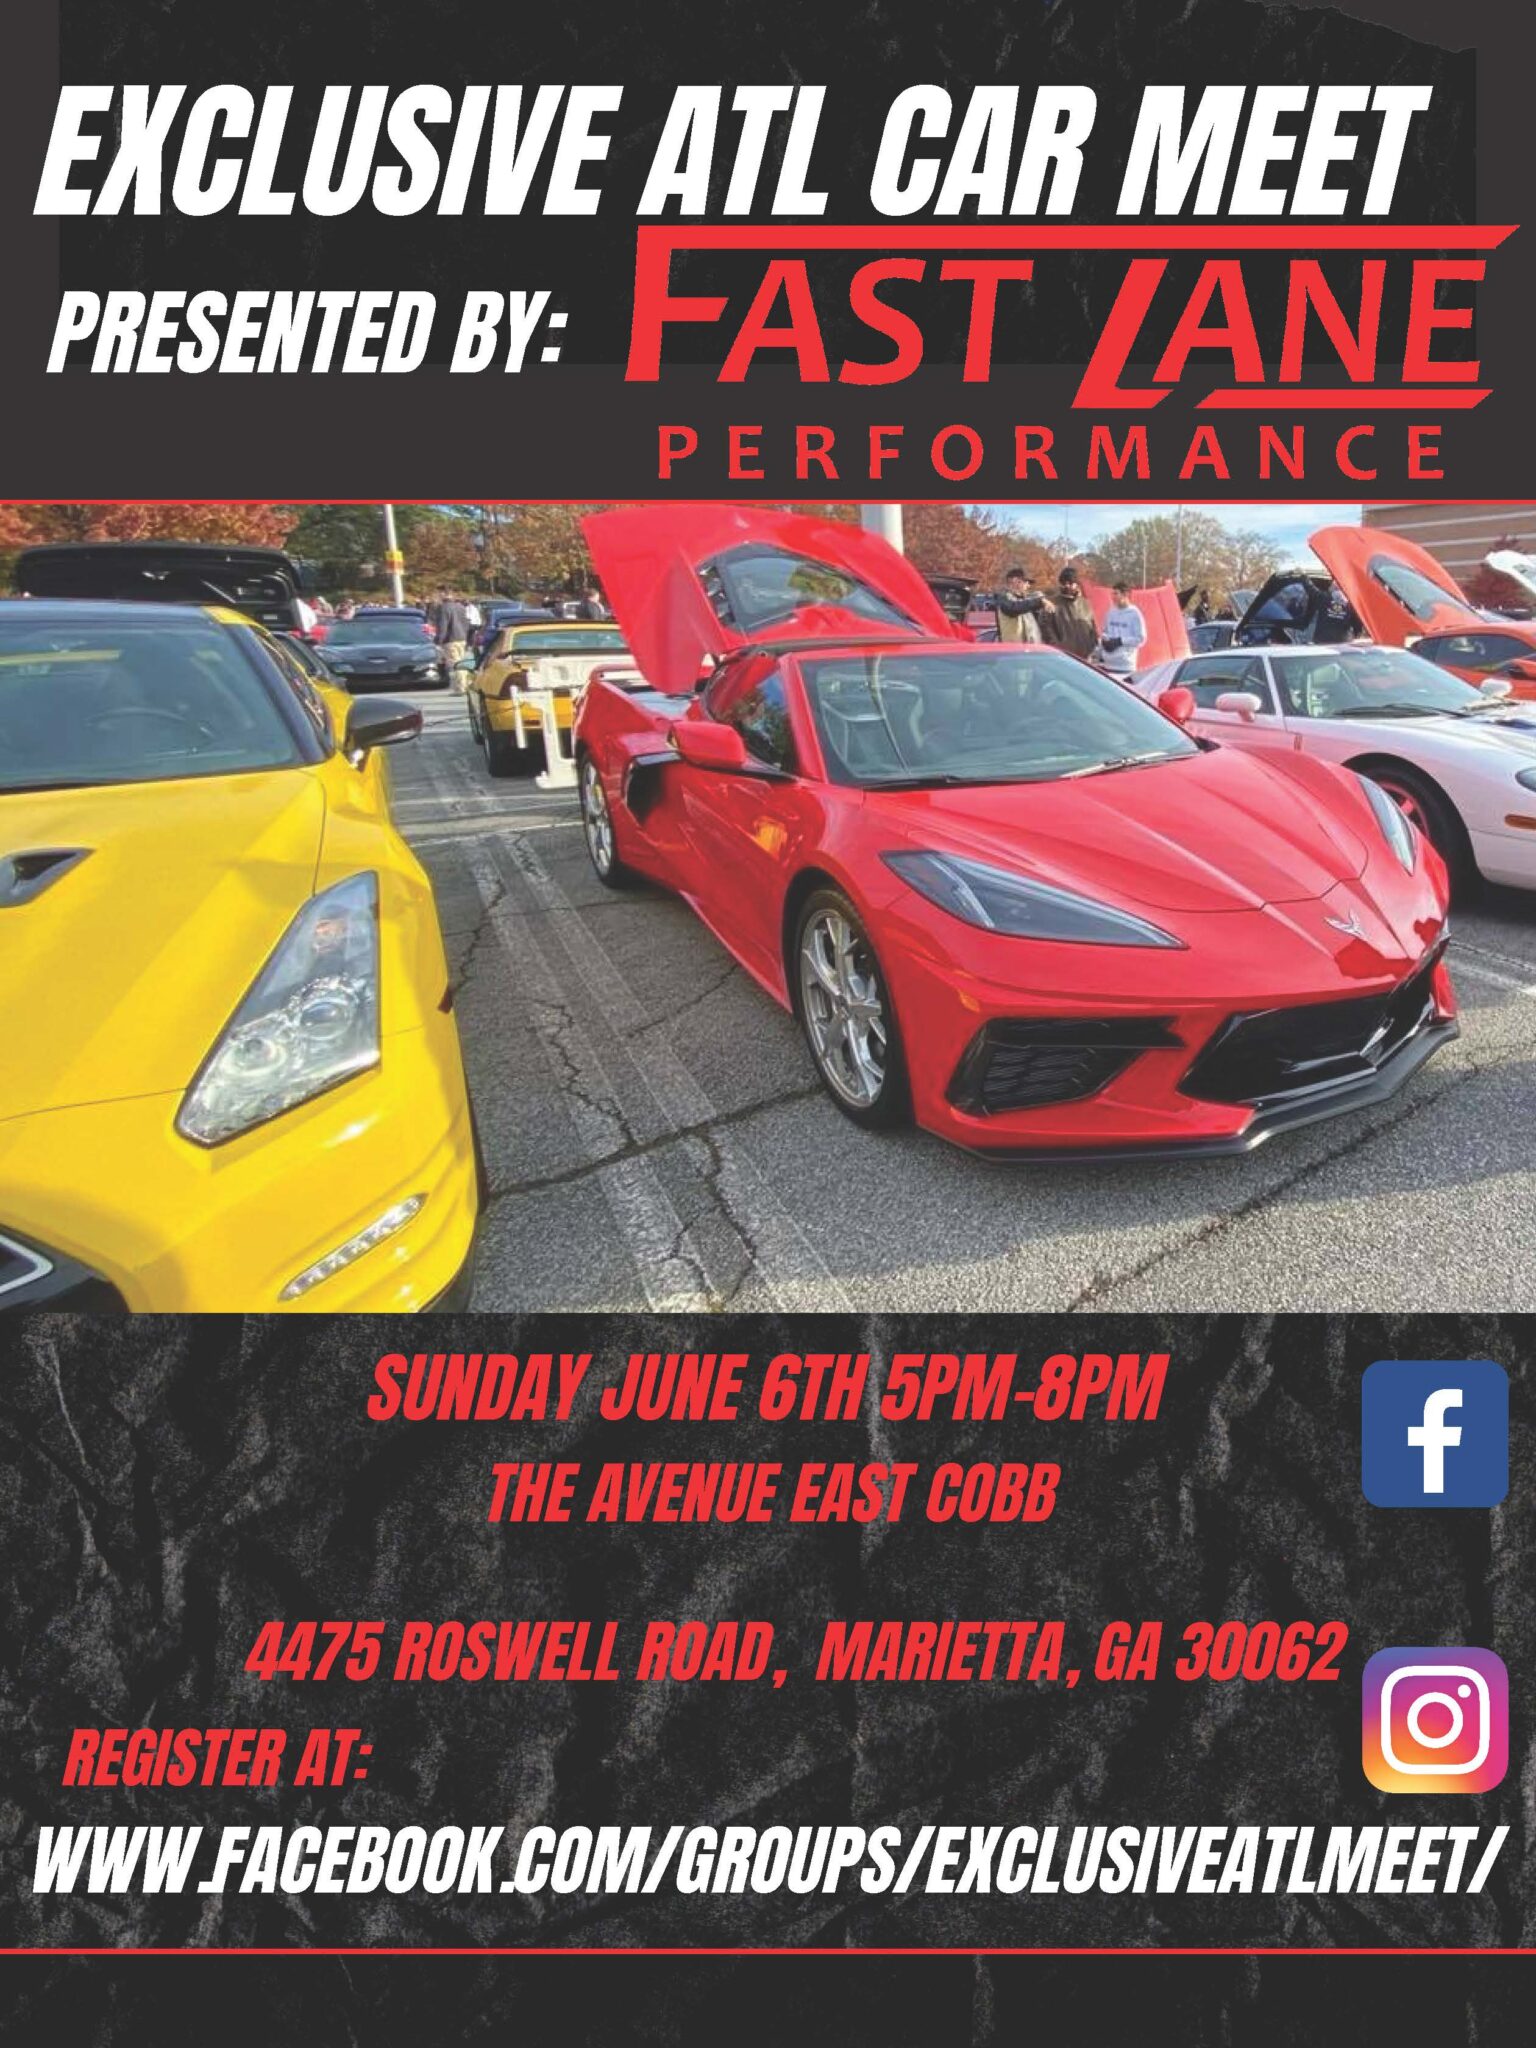 FAST LANE PERFORMANCE CAR SHOW AT THE AVENUE EAST COBB